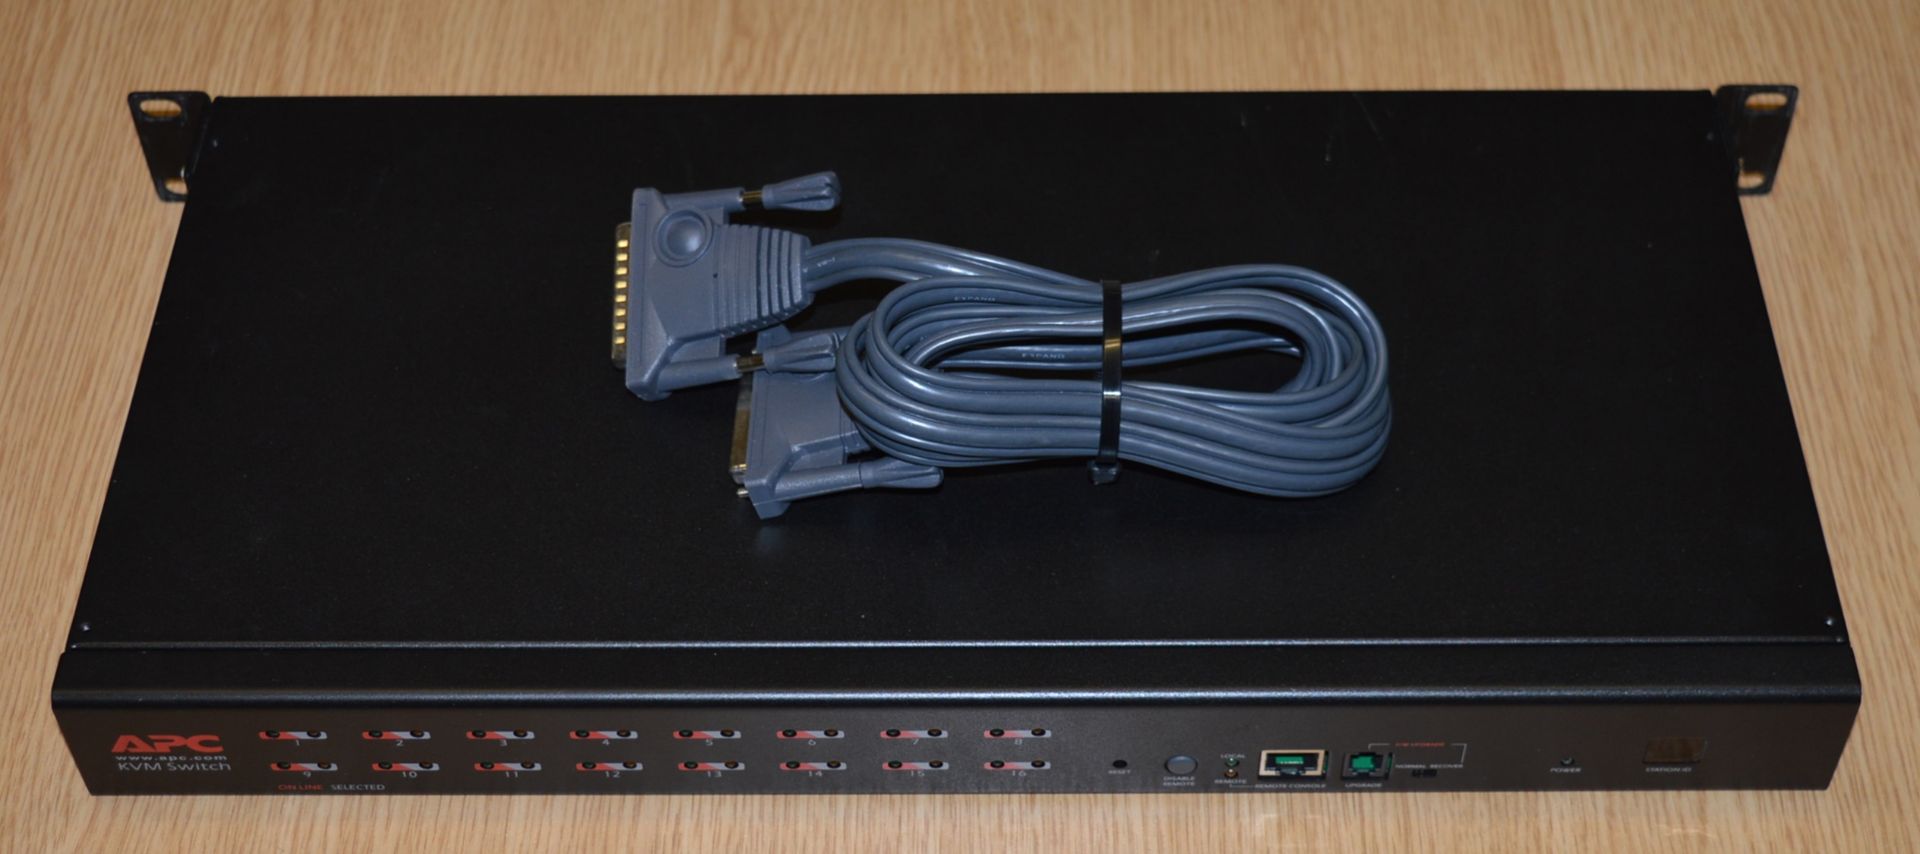 1 x APC 16-Port Multi-Platform Analog KVM Switch - Model AP5202 - With Cable - Removed From